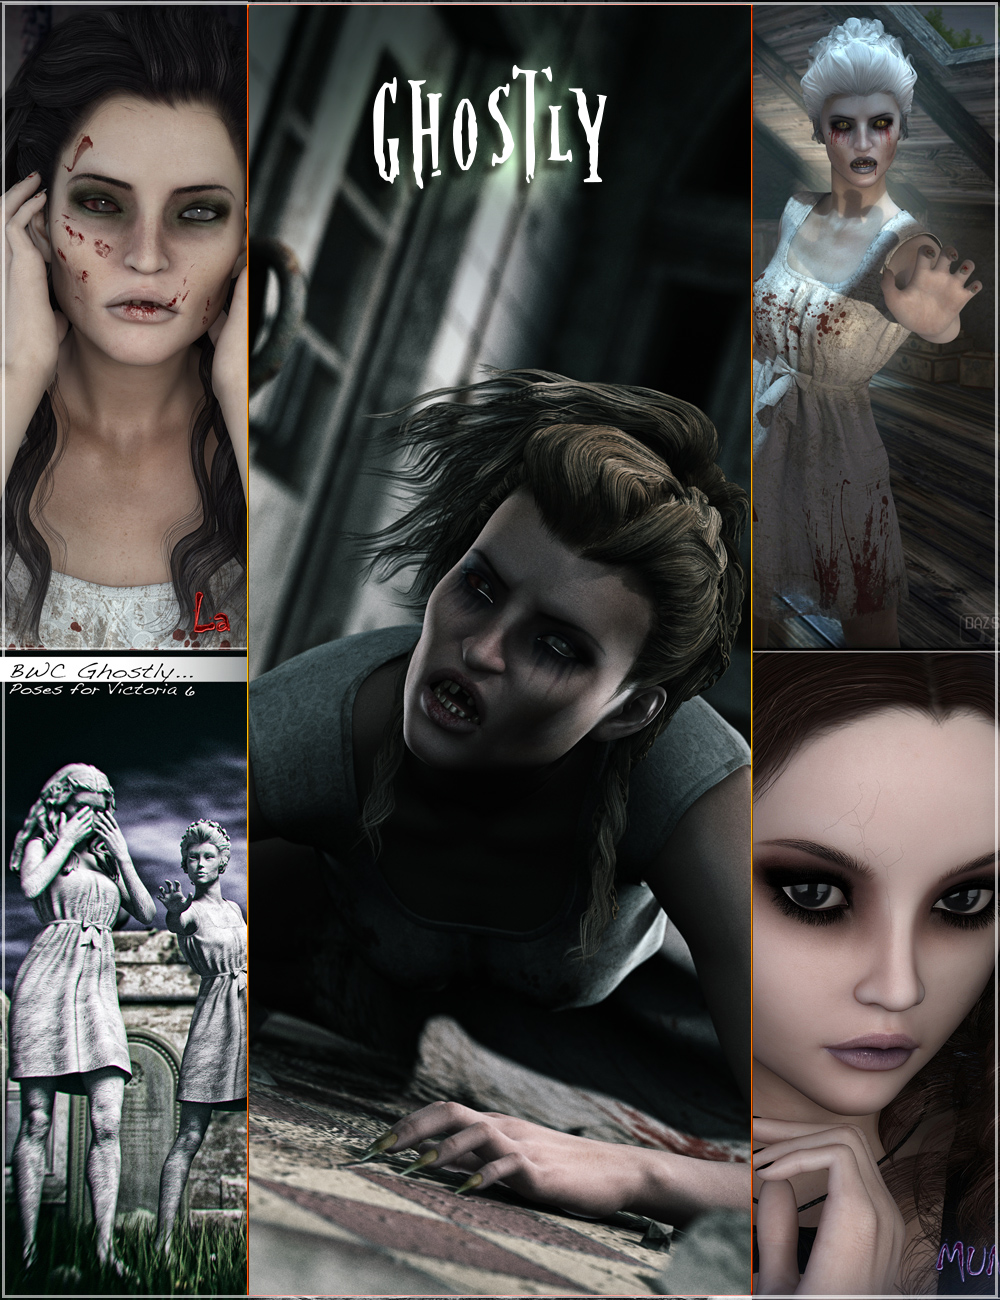 La Llorona - Ghostly HD Characters, Outfit and Poses Bundle by: SabbyFred Winkler ArtFisty & DarcSedor, 3D Models by Daz 3D